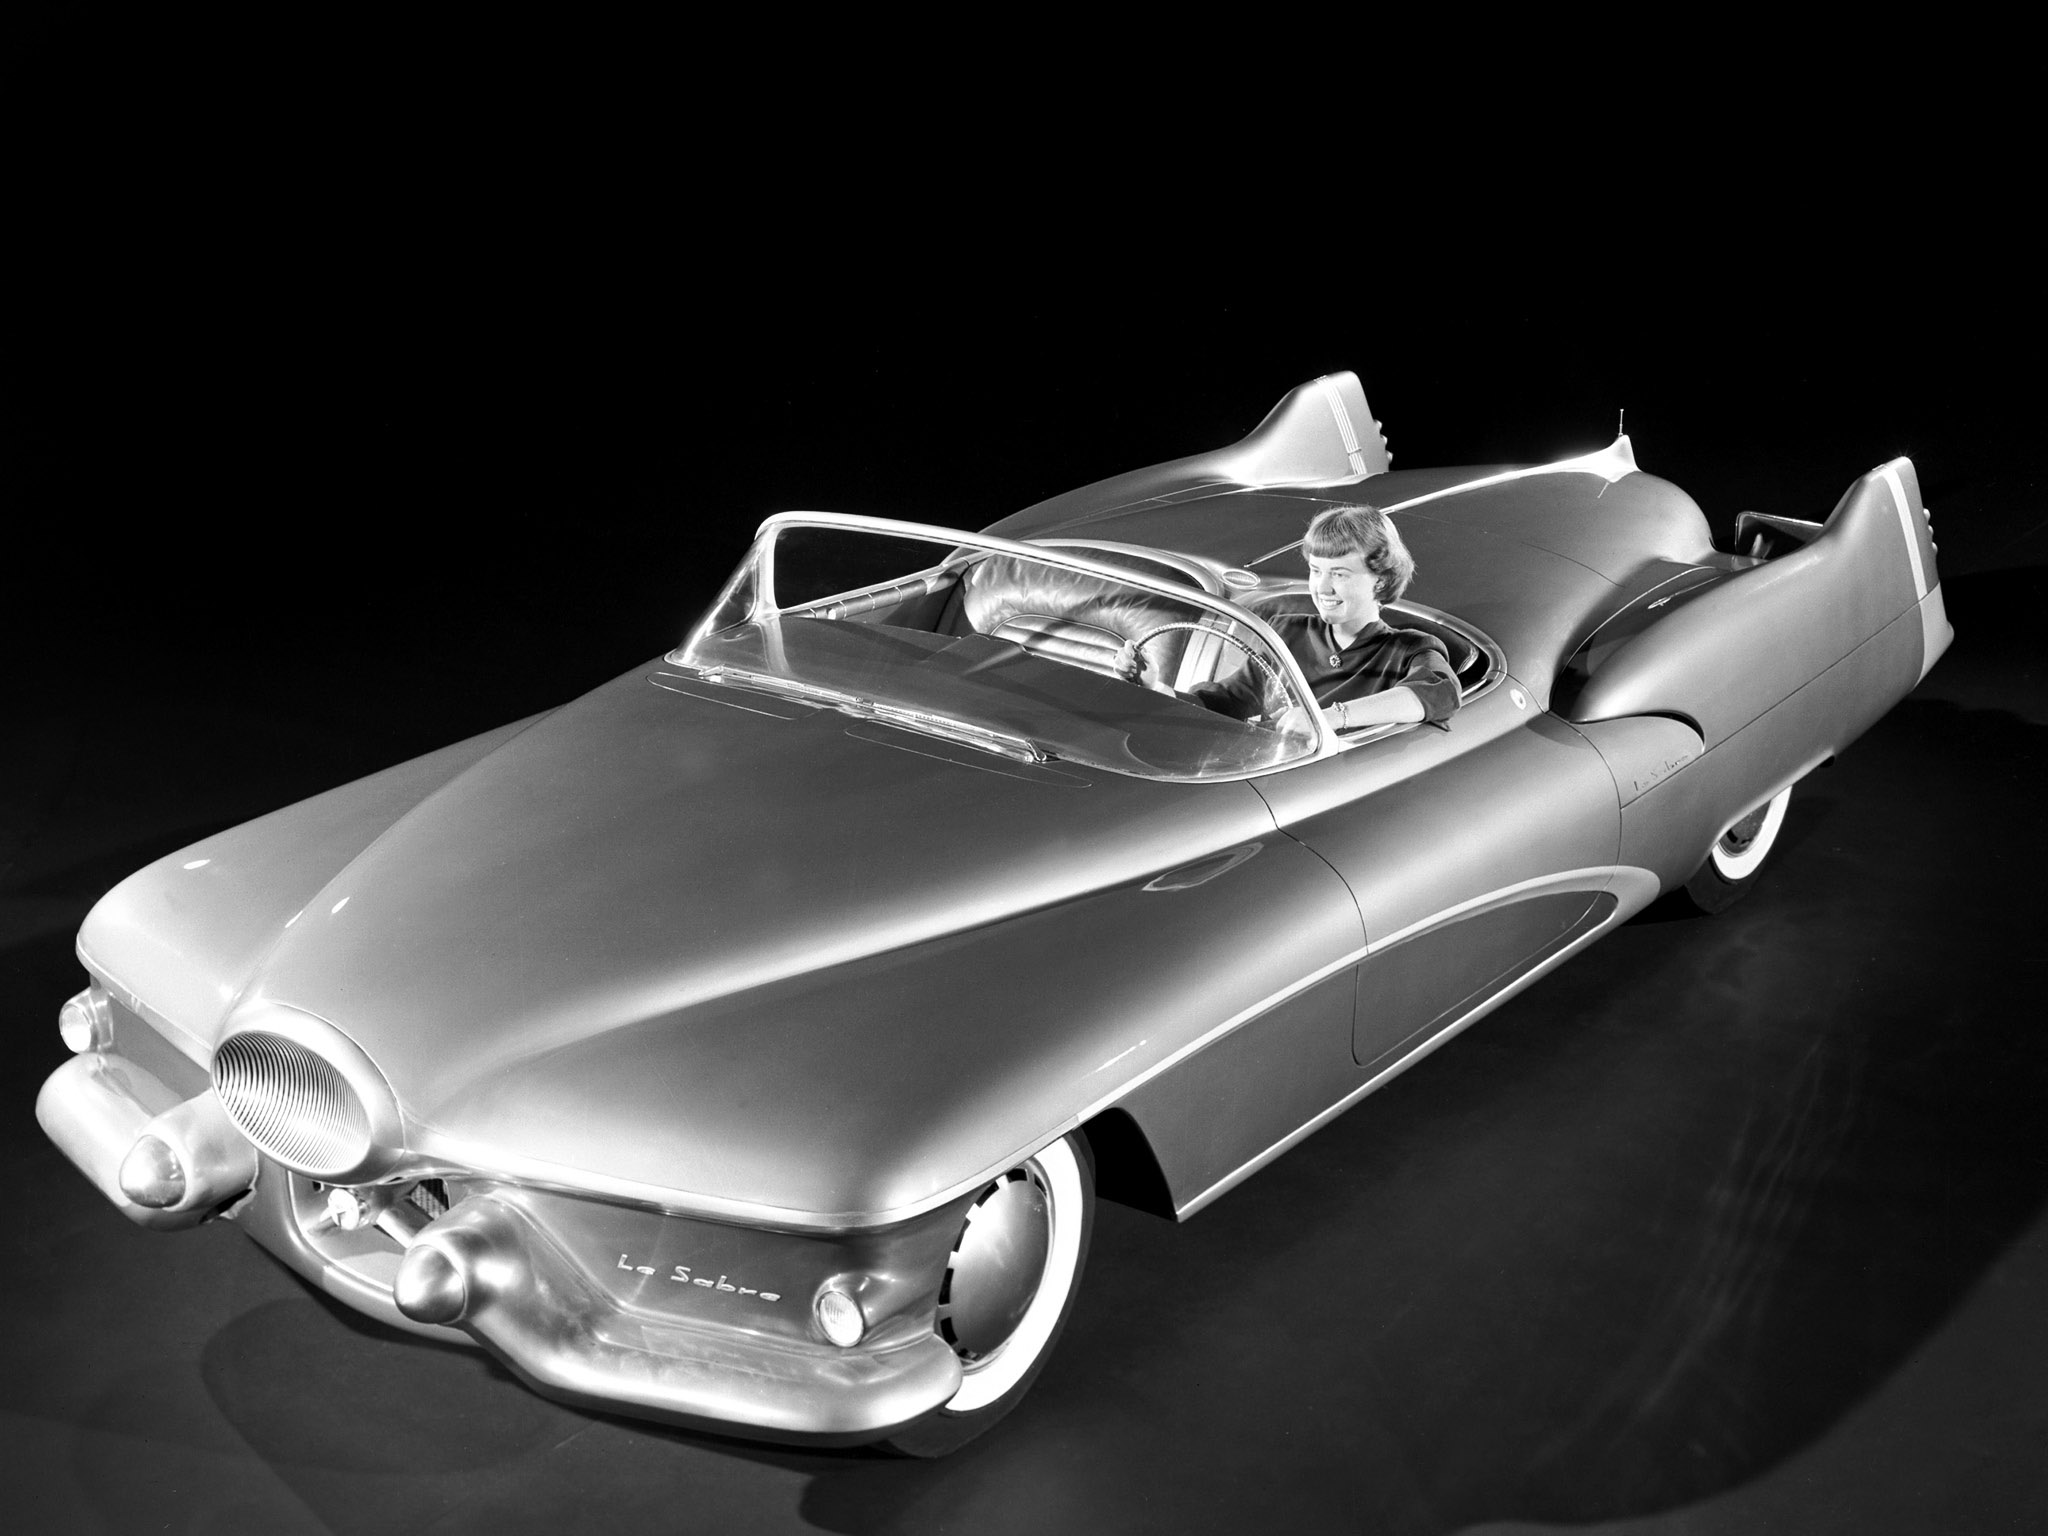 Buick Le-Sabre - Full Scale Model